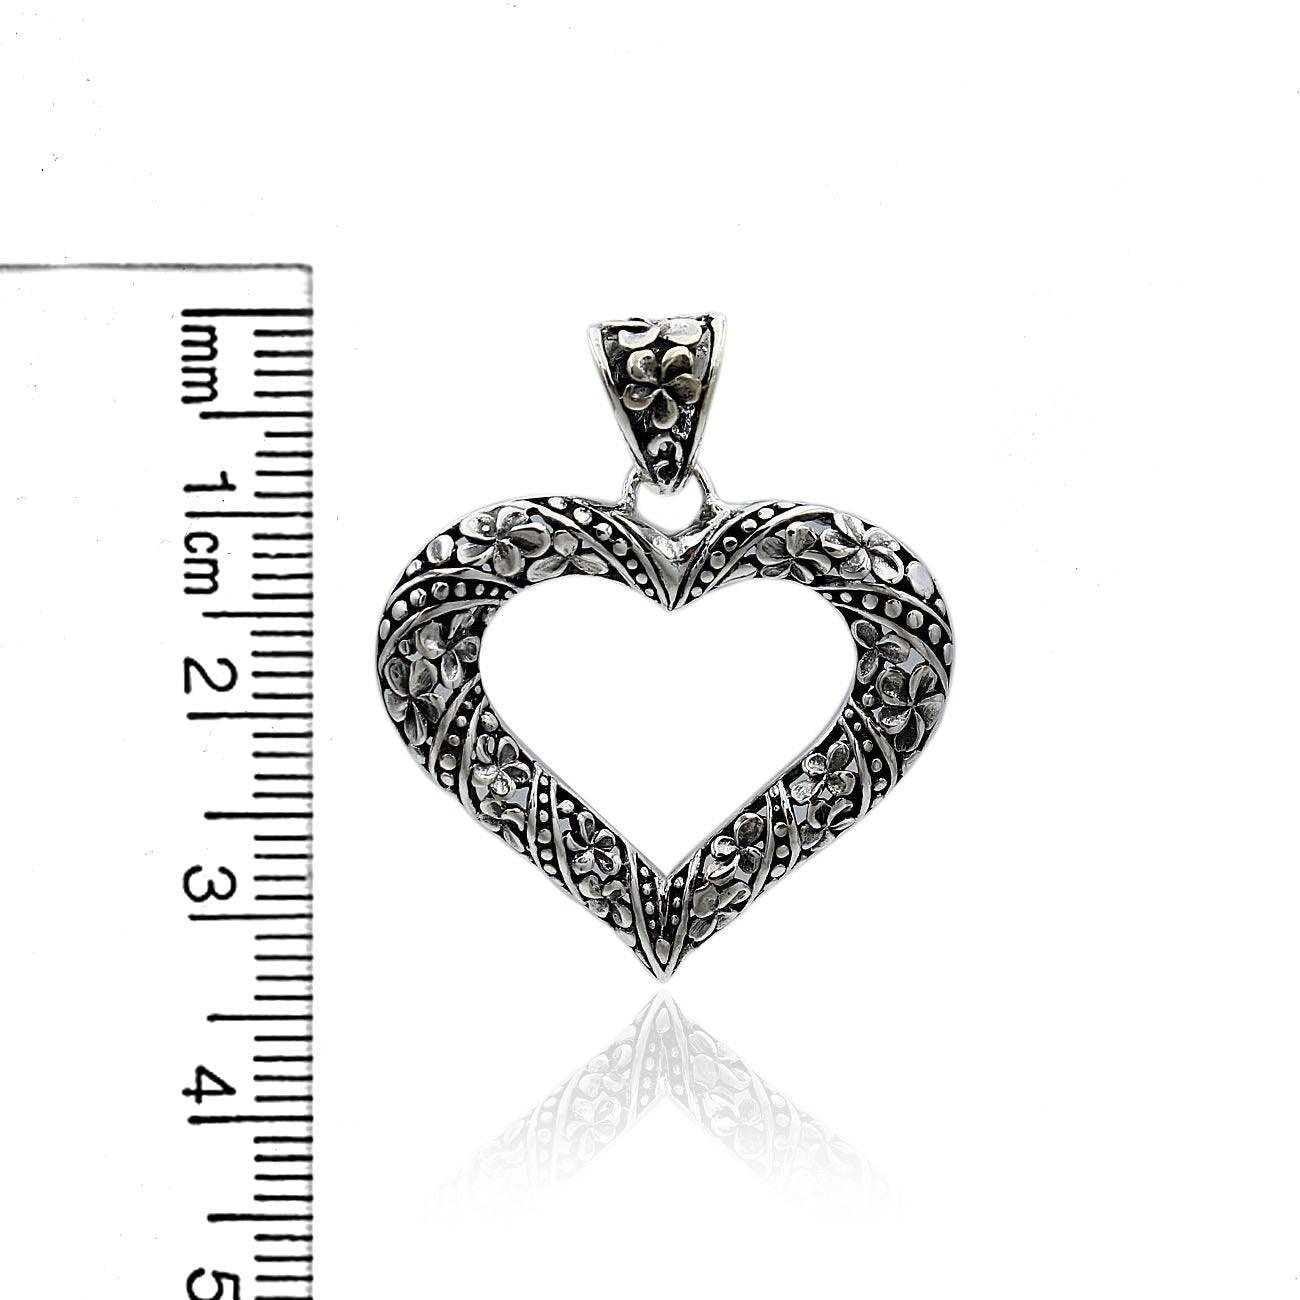 Handmade Frangipani Floral HEART Charm Pendant Necklace in 925 Sterling Silver With Chain - 3.8 Cm - Inspiring Jewellery